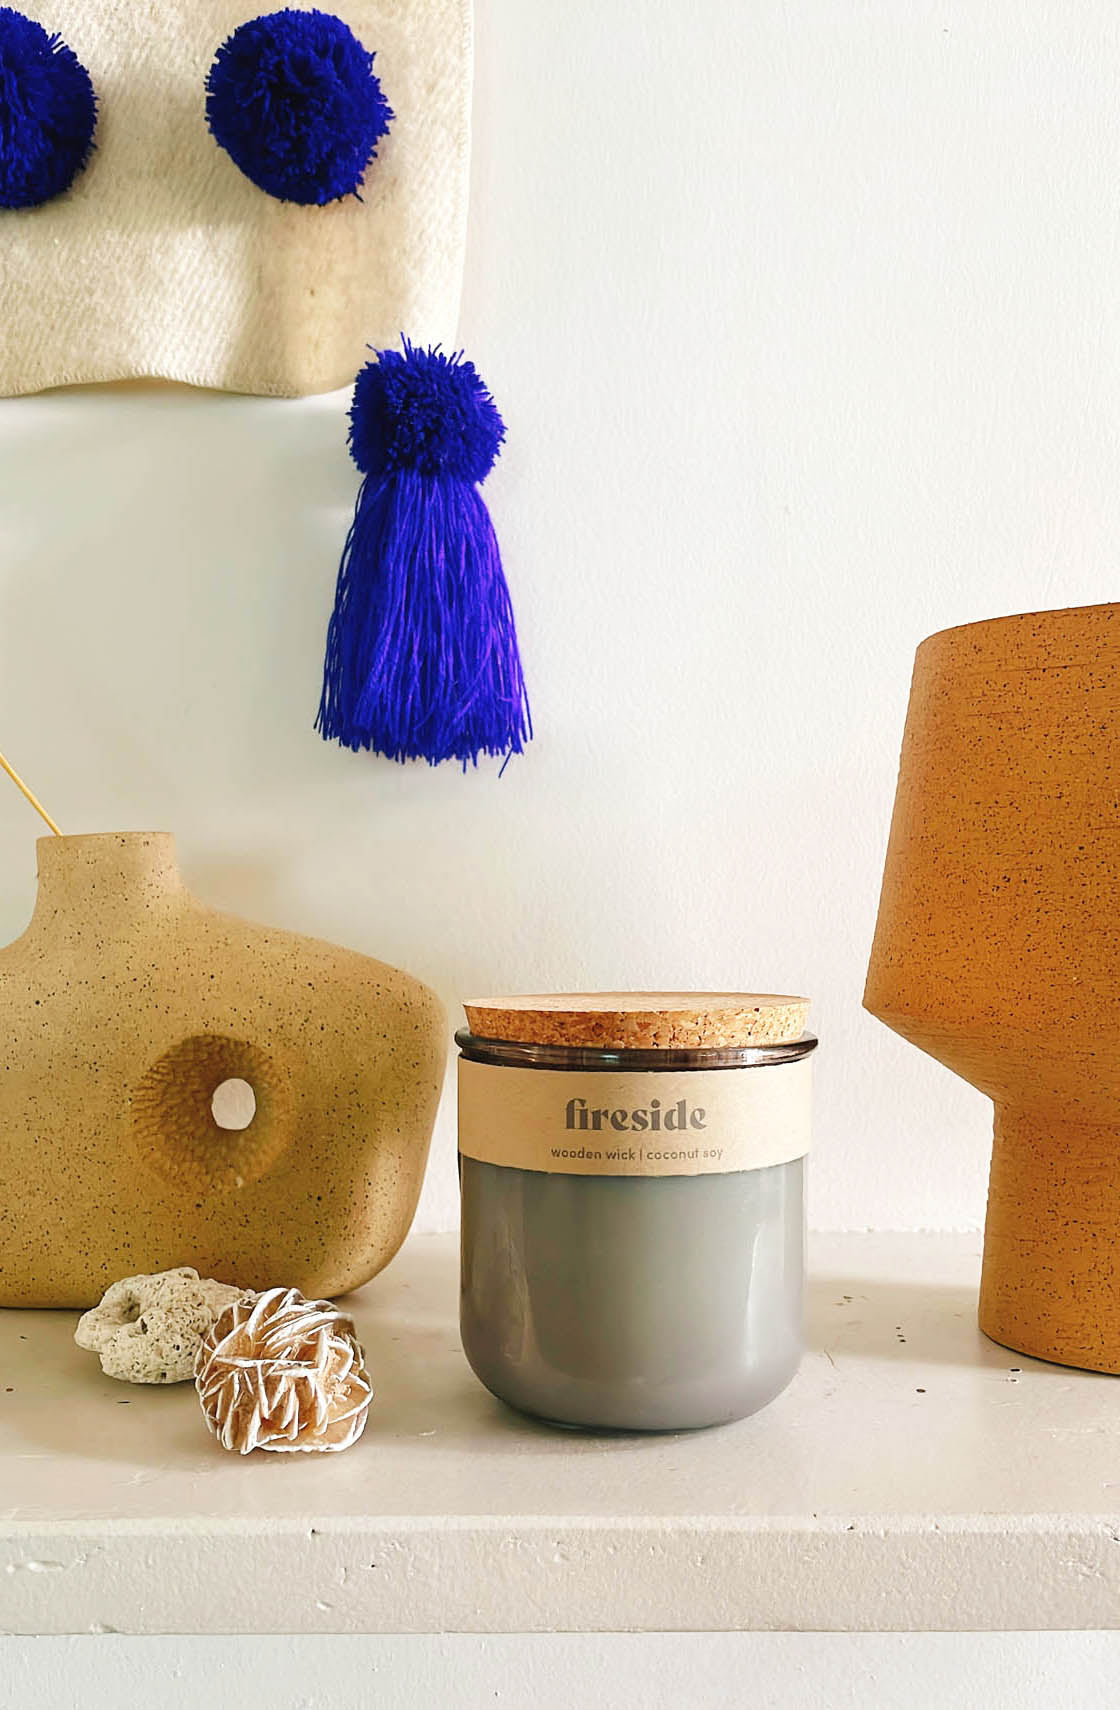 Fireside, Gives to No Kid Hungry - Cork Top & Grey Recycled Glass Jar